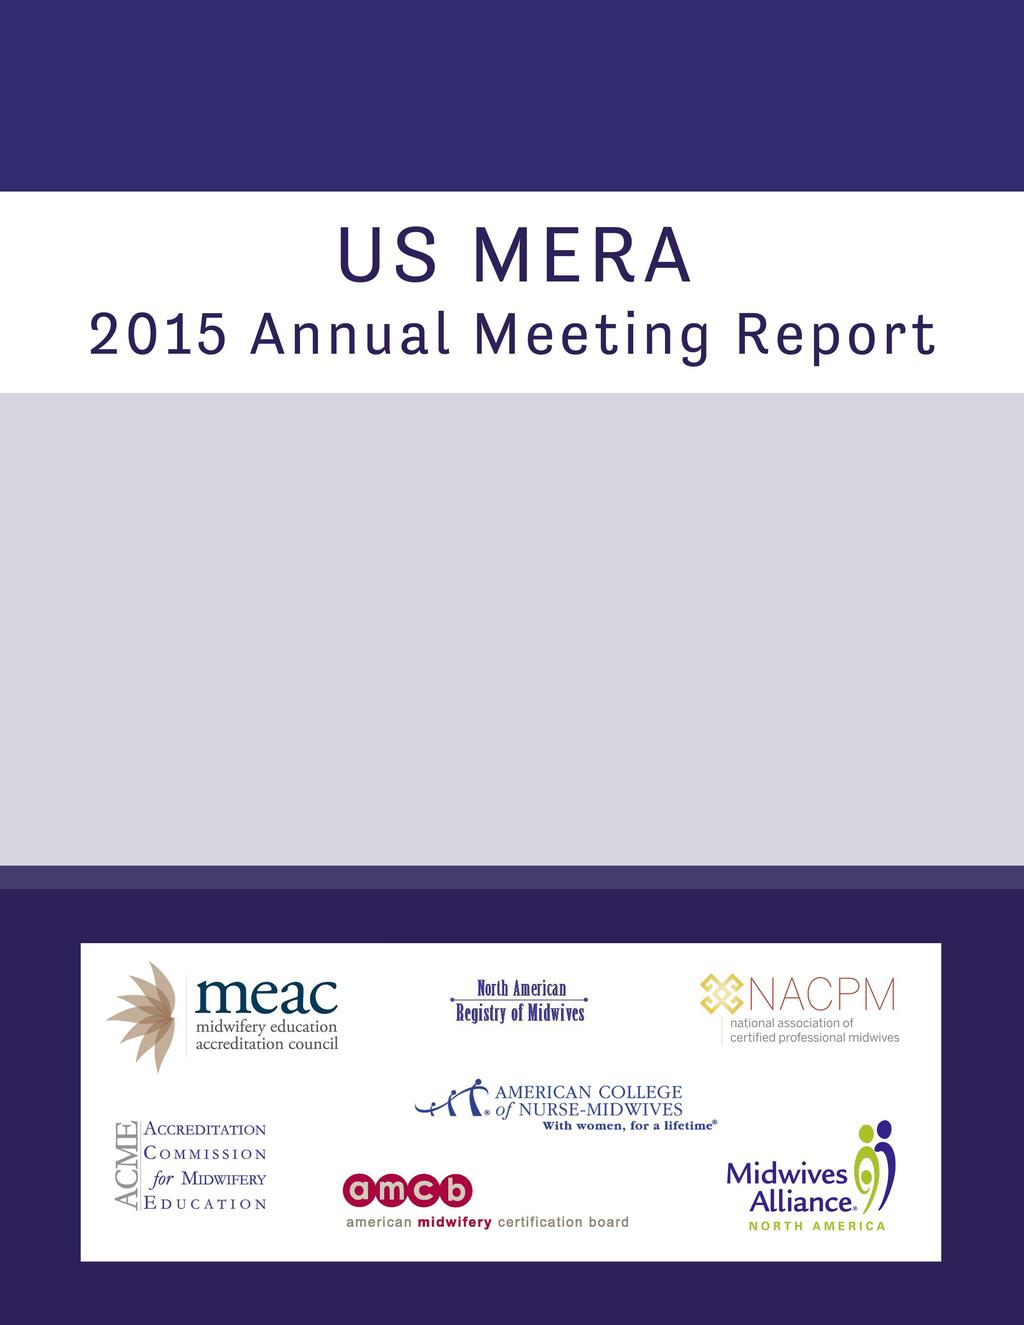 US MERA 2015 Annual Meeting Report meac midwifery education accreditation council North American Registry of Midwives ~ NACPM national association of certified professional midwives ~